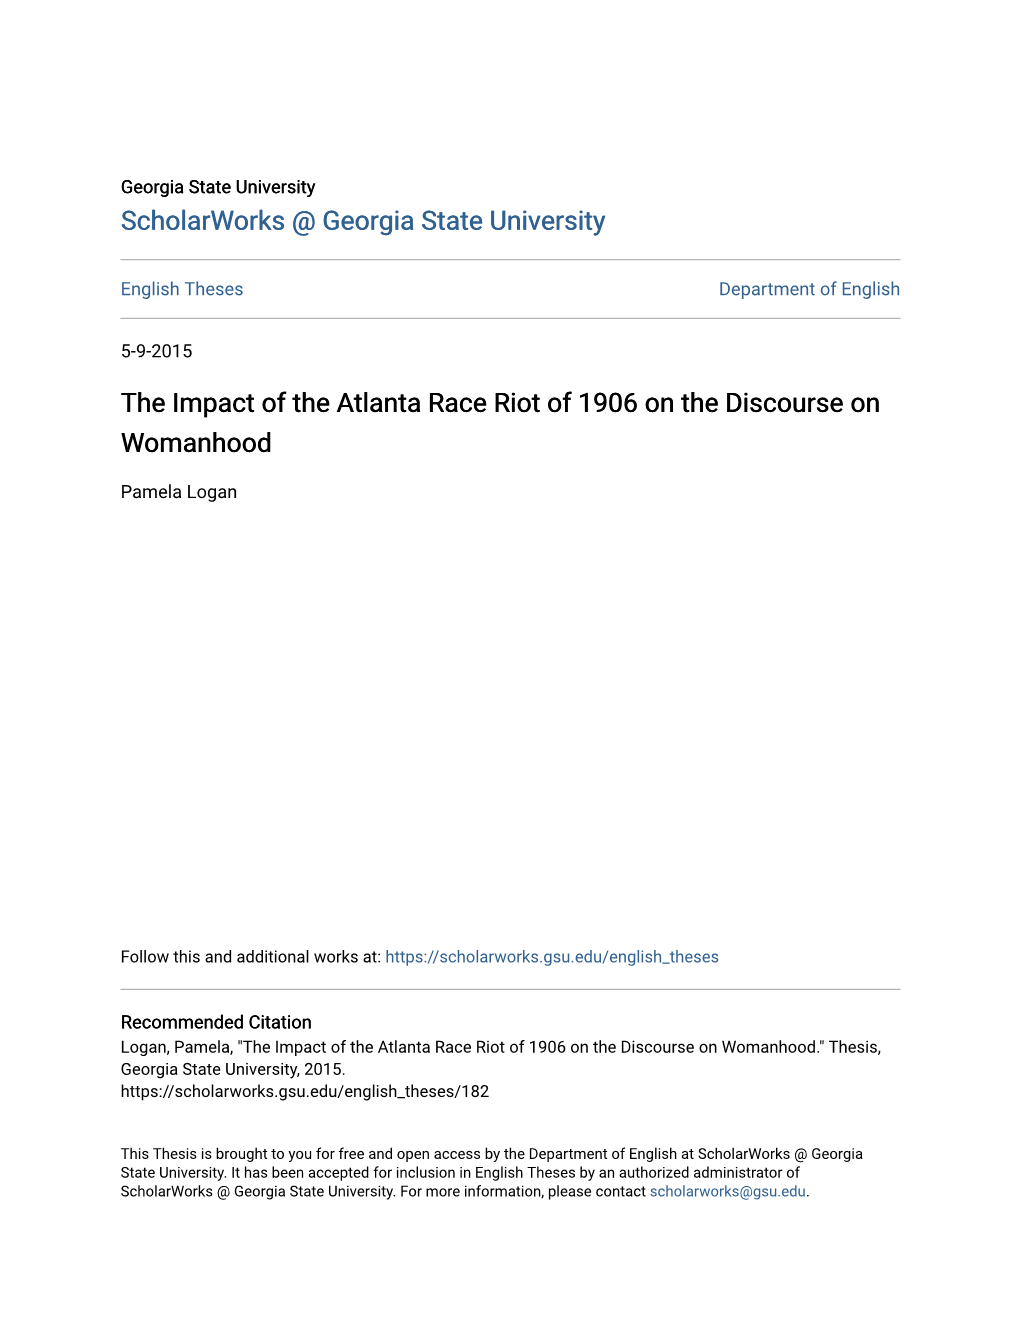 The Impact of the Atlanta Race Riot of 1906 on the Discourse on Womanhood